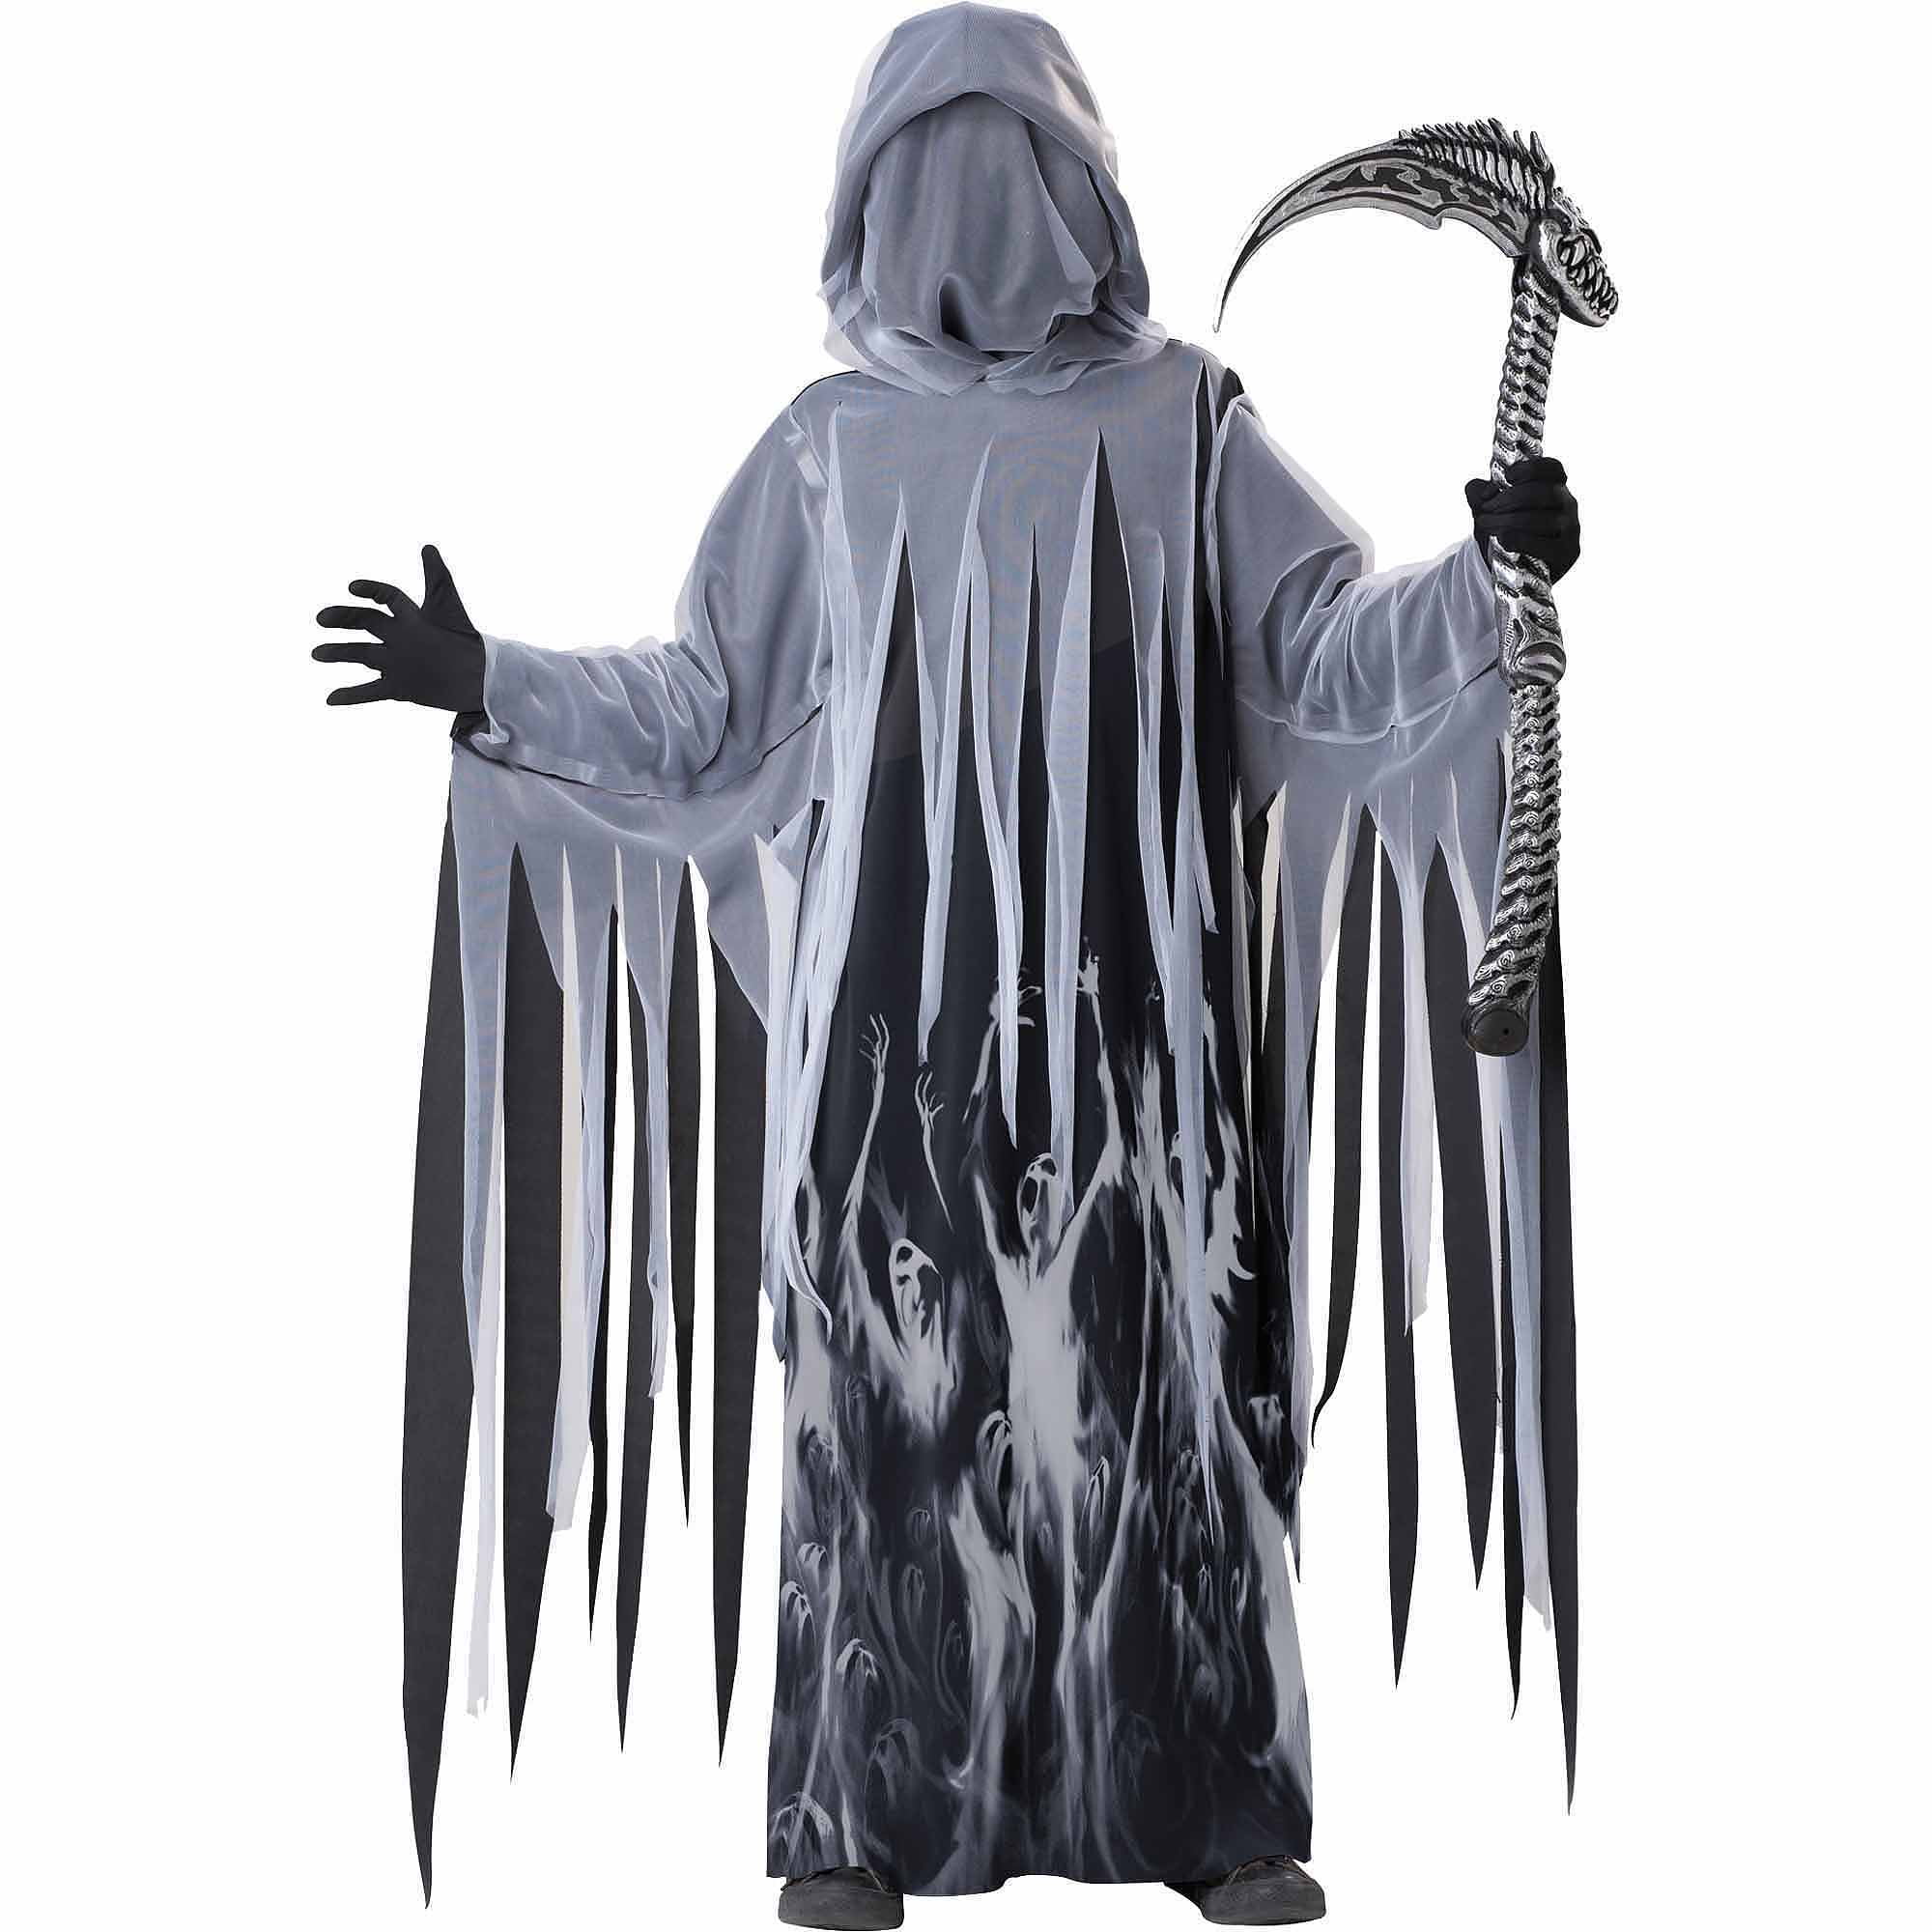 CHILDRENS GRIM REAPER DEATH HALLOWEEN FANCY DRESS COSTUME KID OUTFIT HOODED ROBE 